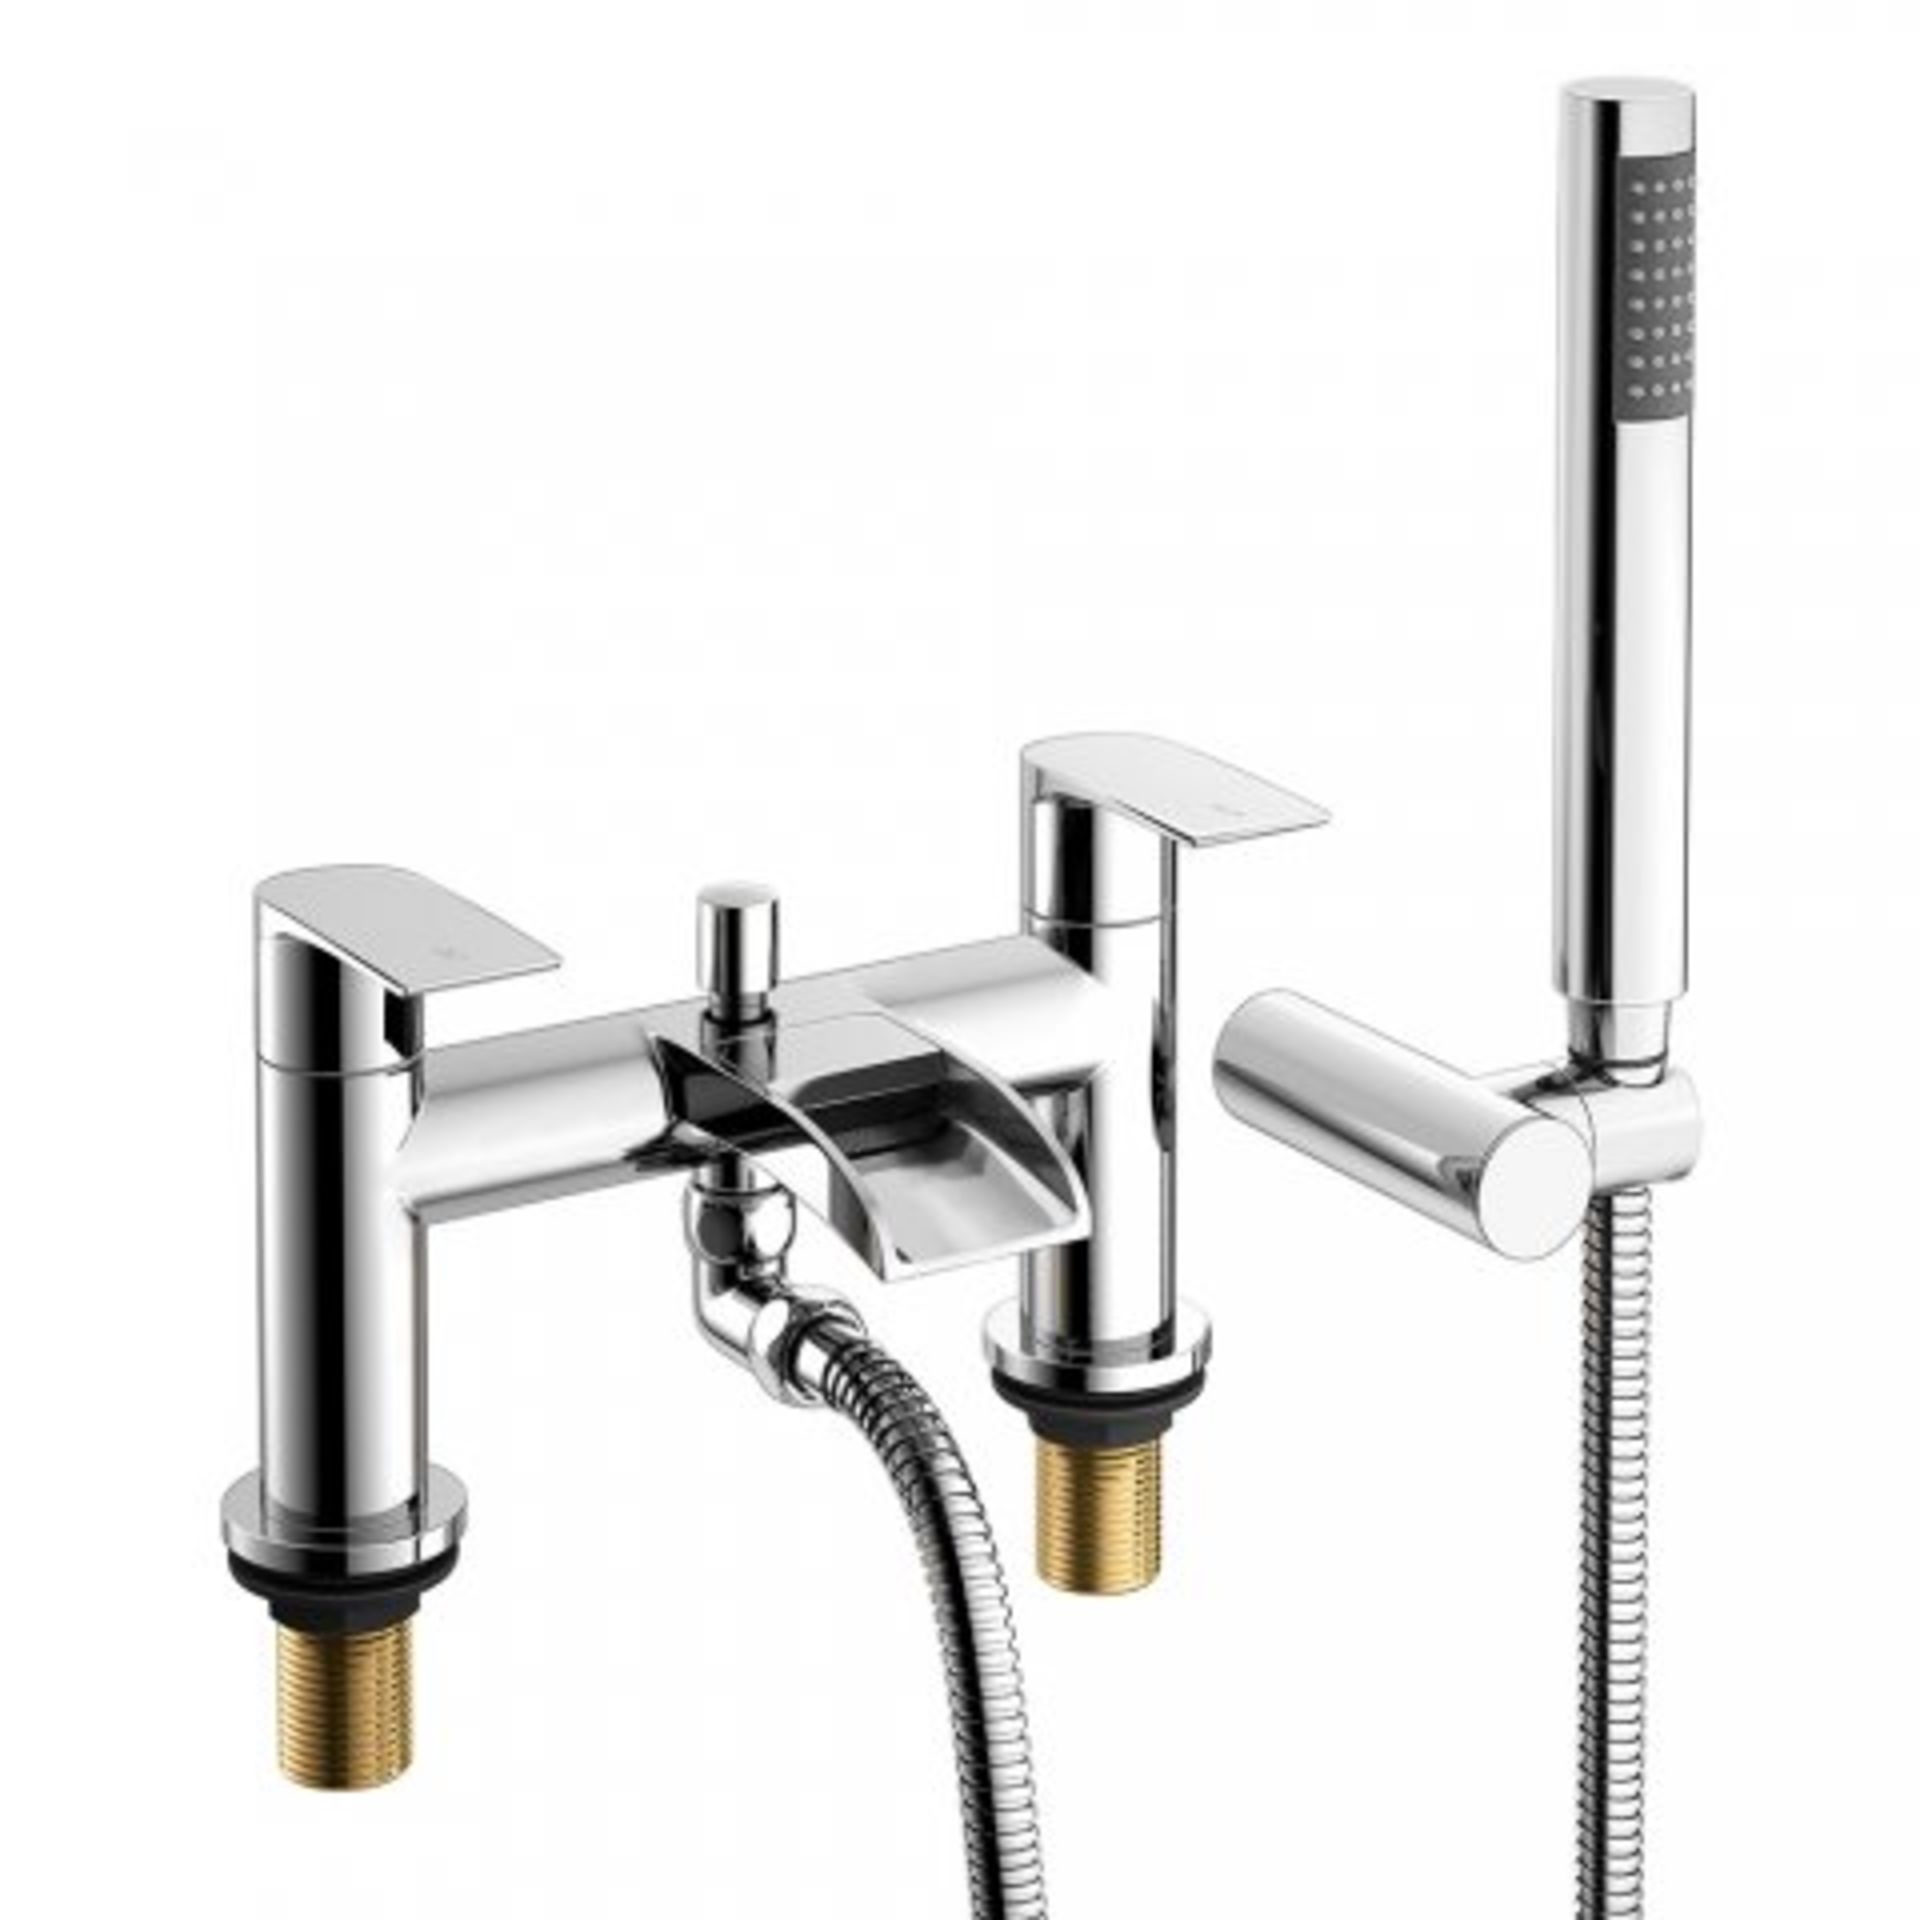 (AA270) Avis II Waterfall Bath Shower Mixer Tap with Hand Held Shower Head Presenting a contemporary - Image 2 of 3